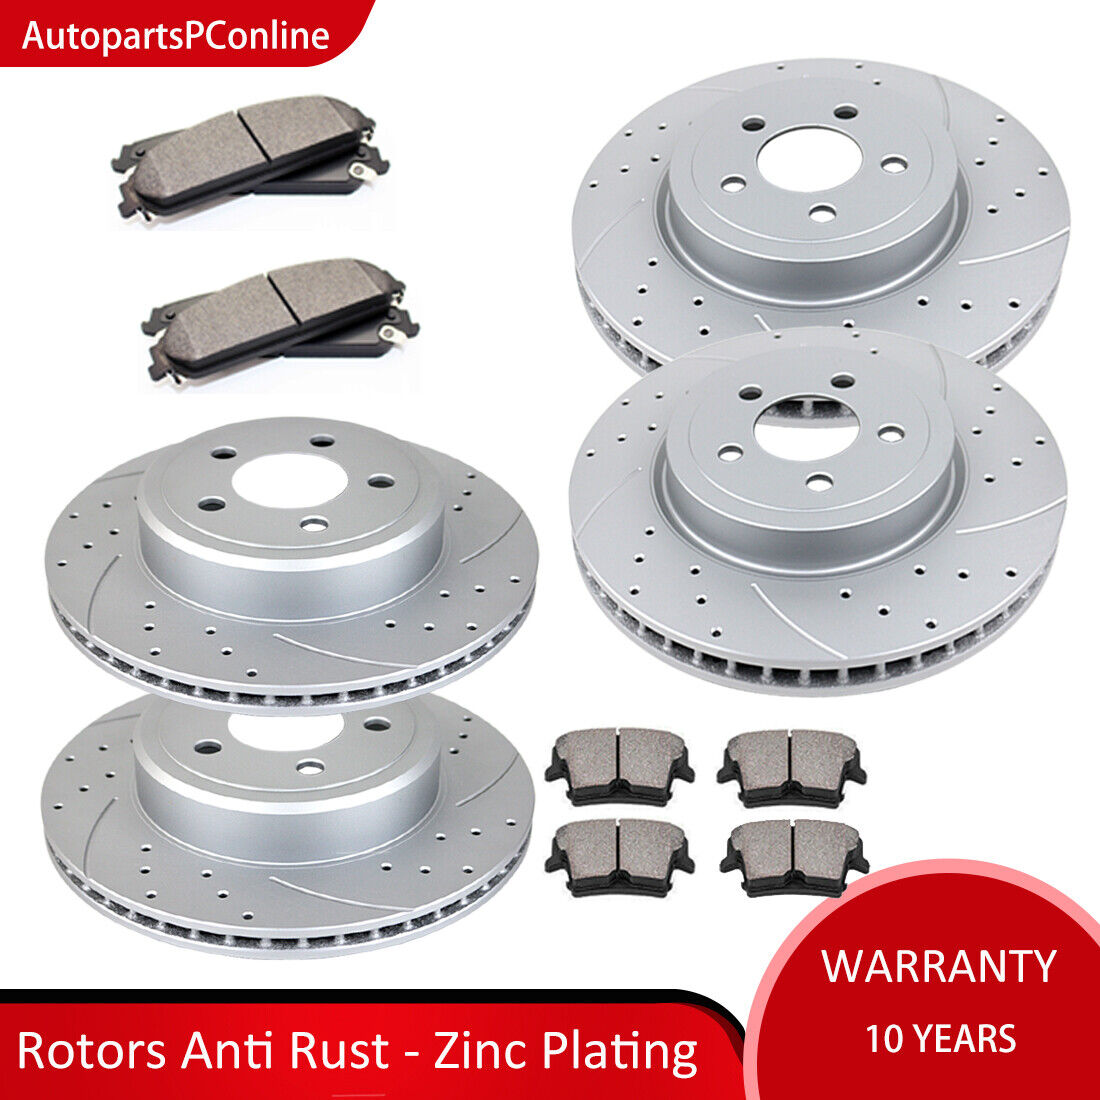 Drilled Slotted Front Rear Brake Rotors Pads Kit for DODGE Charger CHRYSLE 5.7L